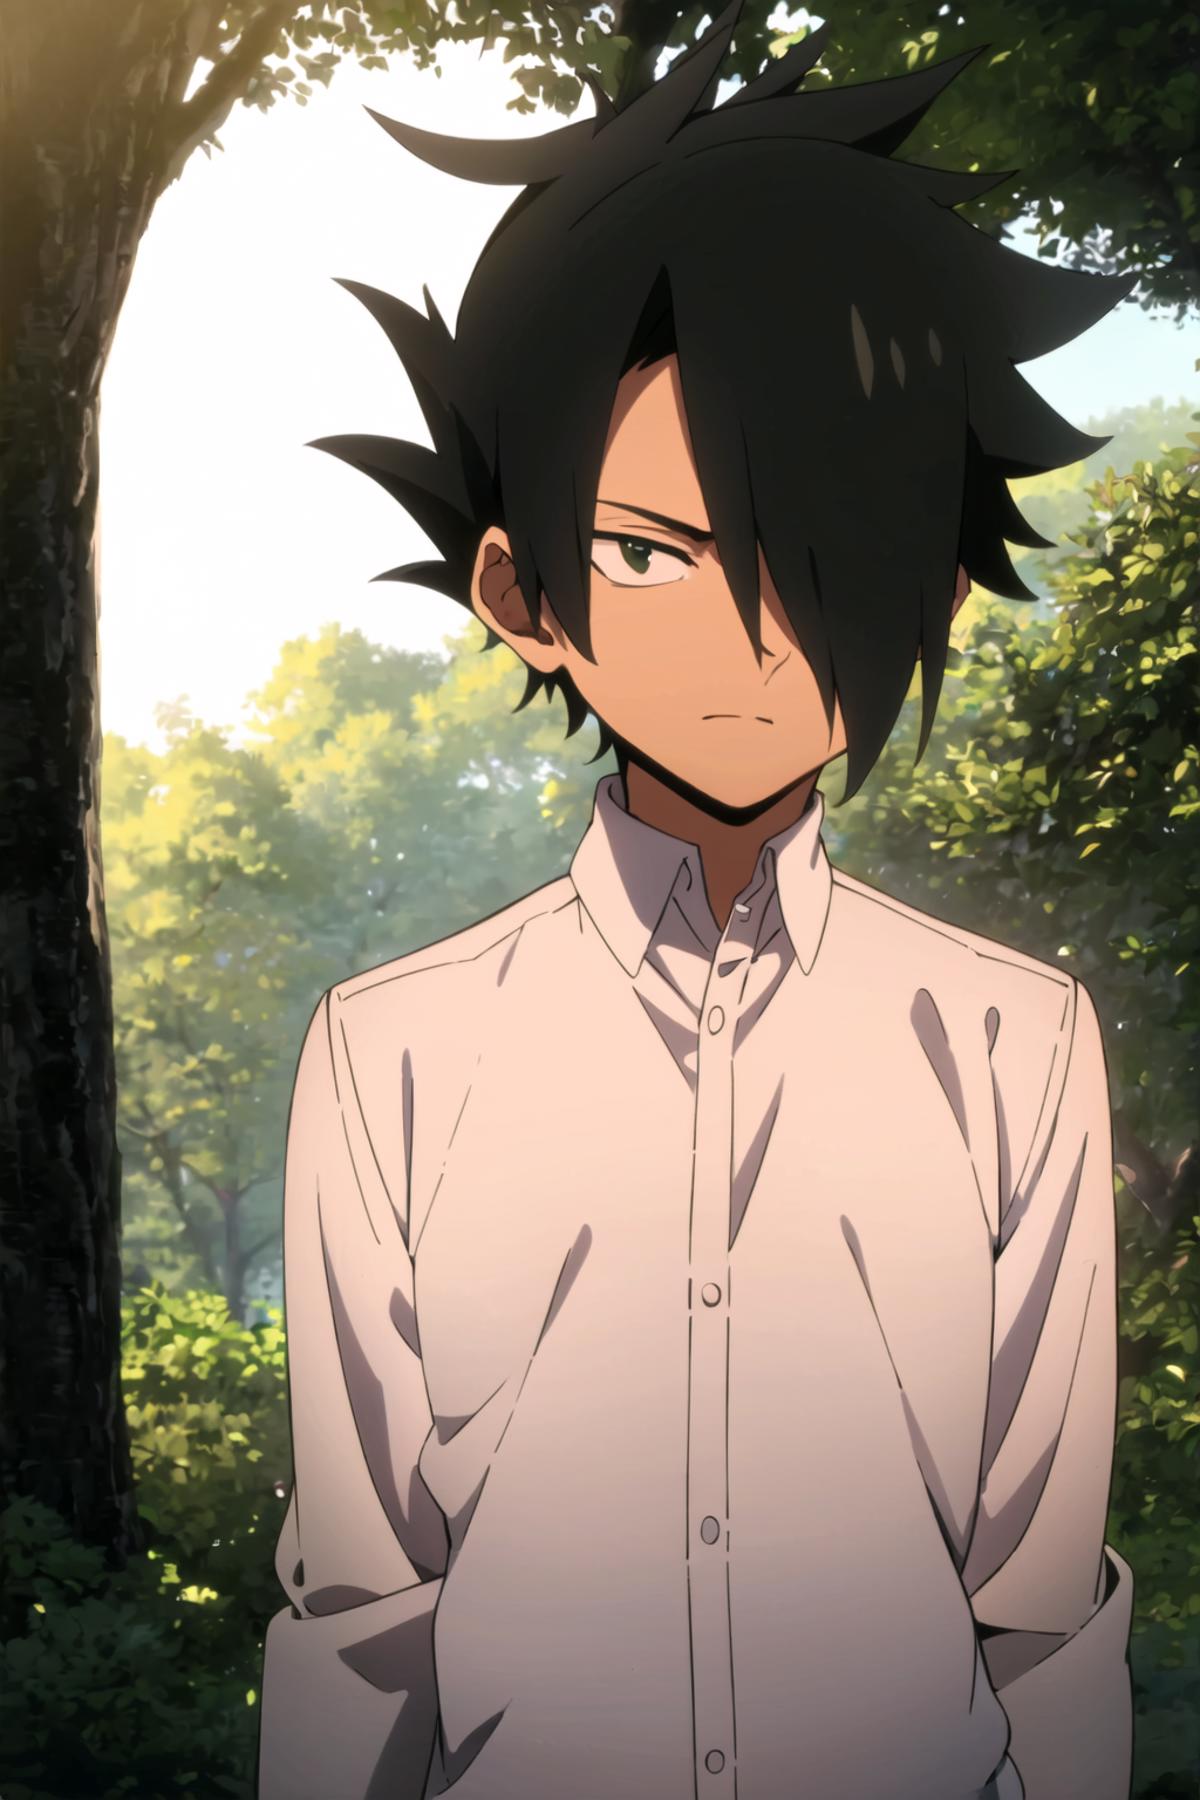 ray the promised neverland anime - Google Search